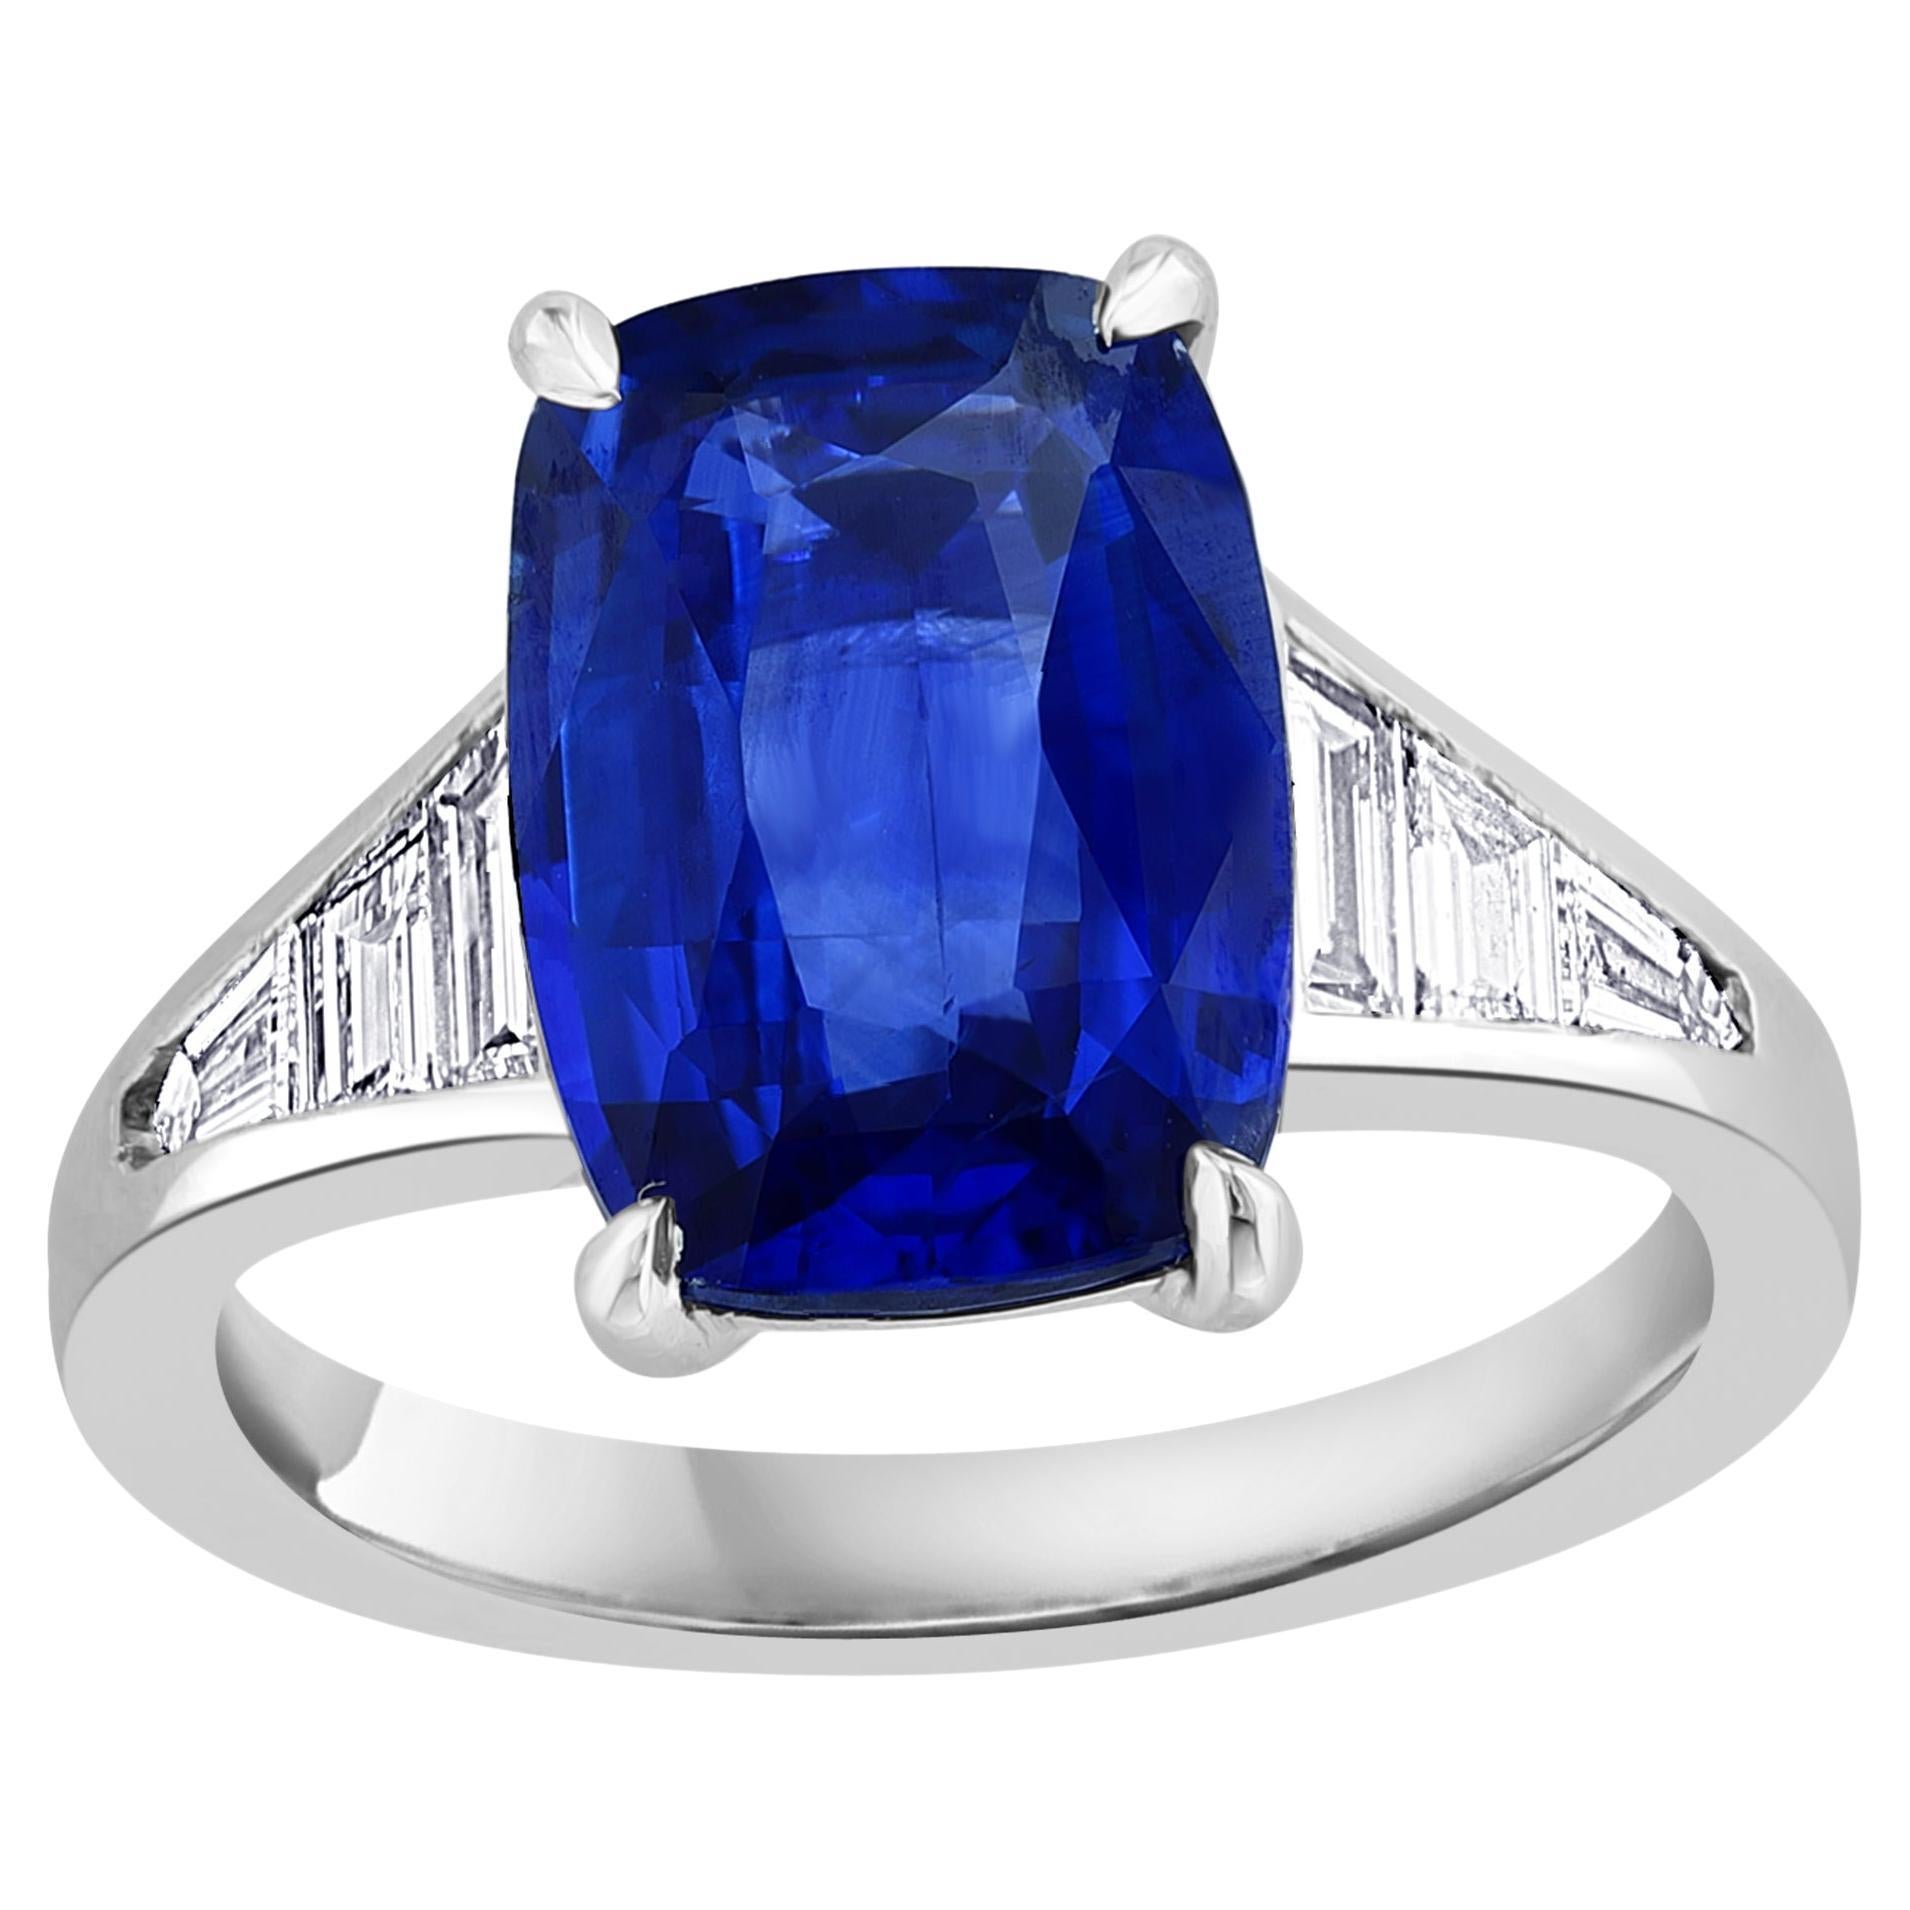 4.50 Carat Cushion Cut Sapphire and Diamond Engagement Ring in Platinum For Sale